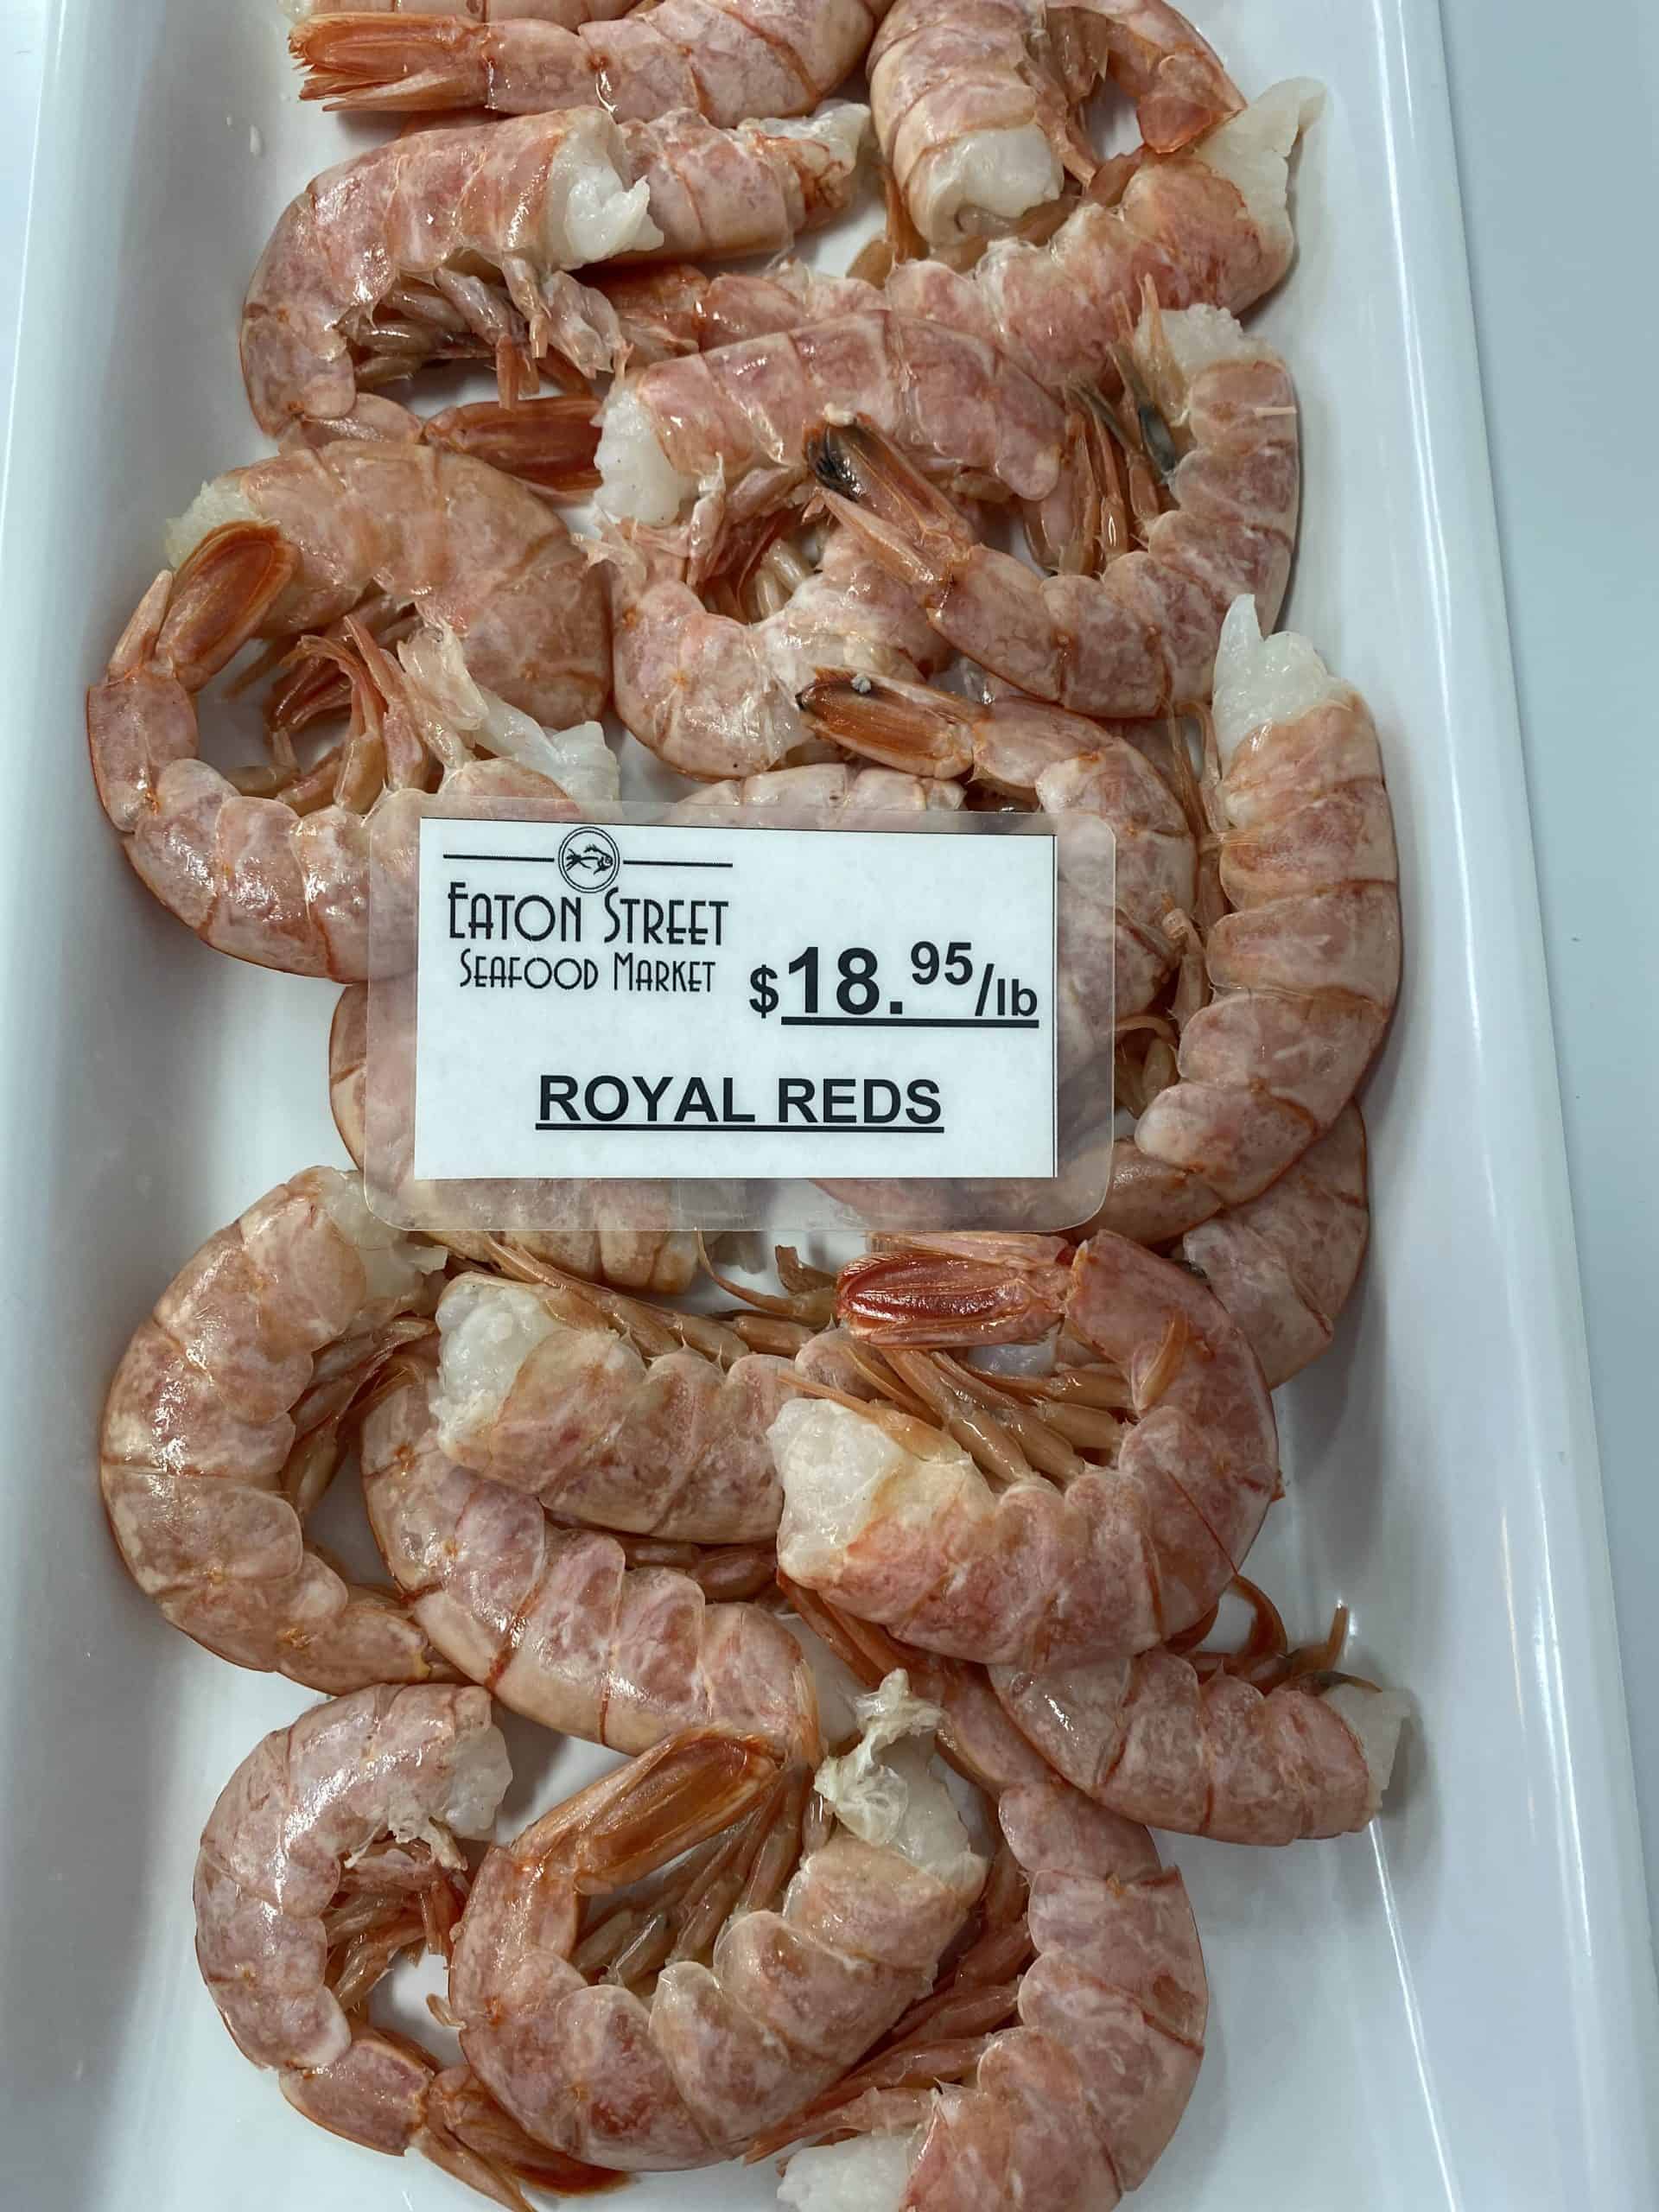 Royal Red Shrimp Fresh Caught In Key West And Shipped Overnight